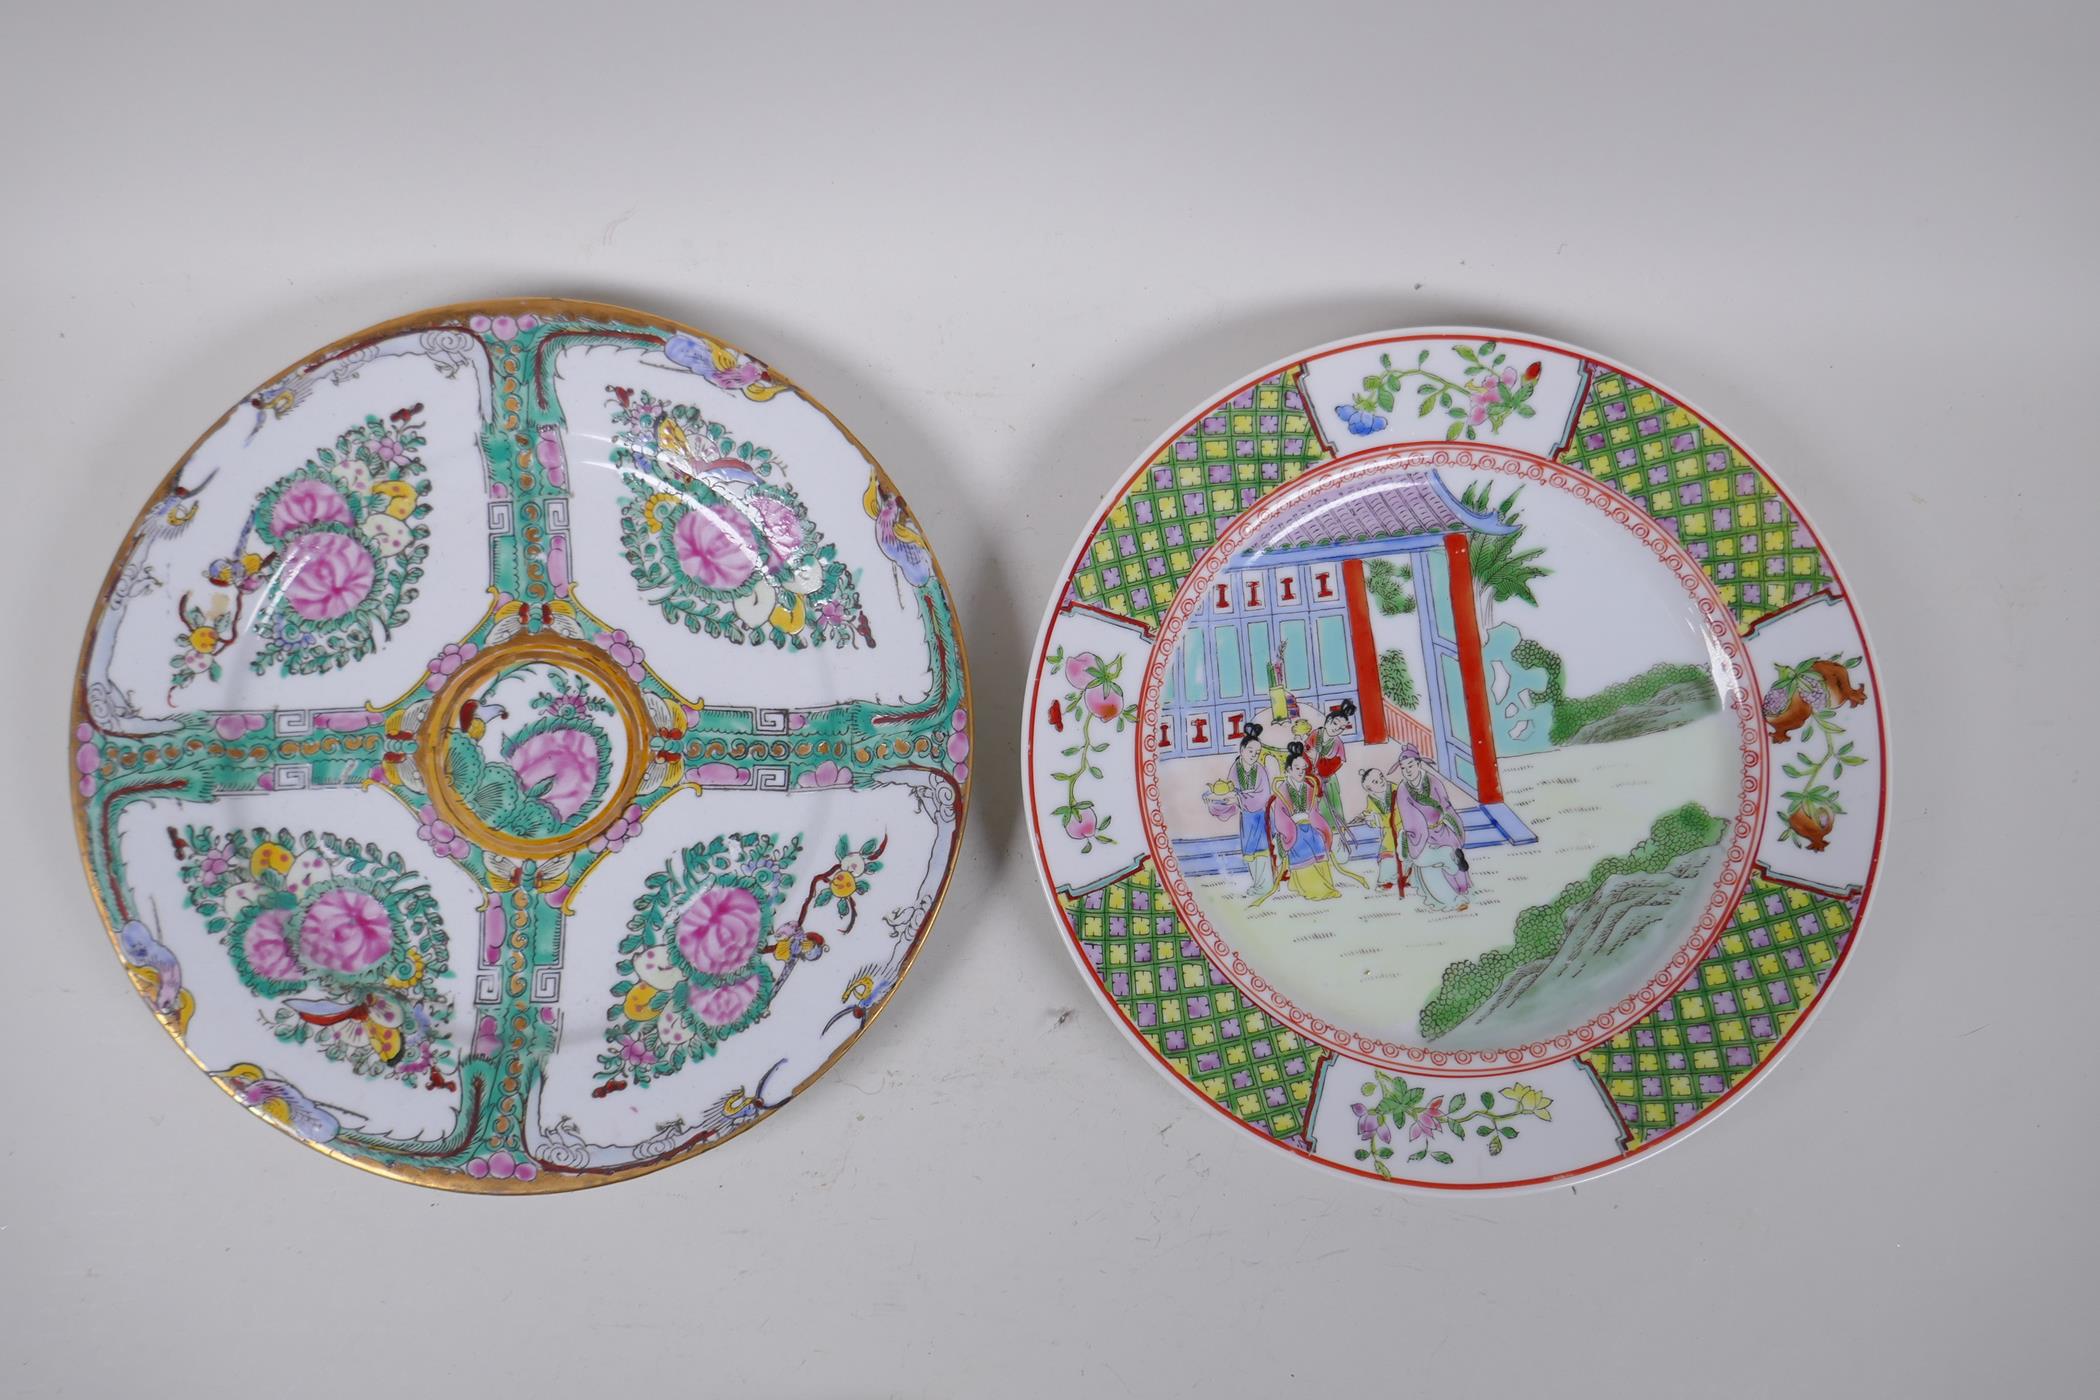 A C19th Canton enamelled porcelain saucer with figural decoration, a C19th famille rose saucer - Image 6 of 8